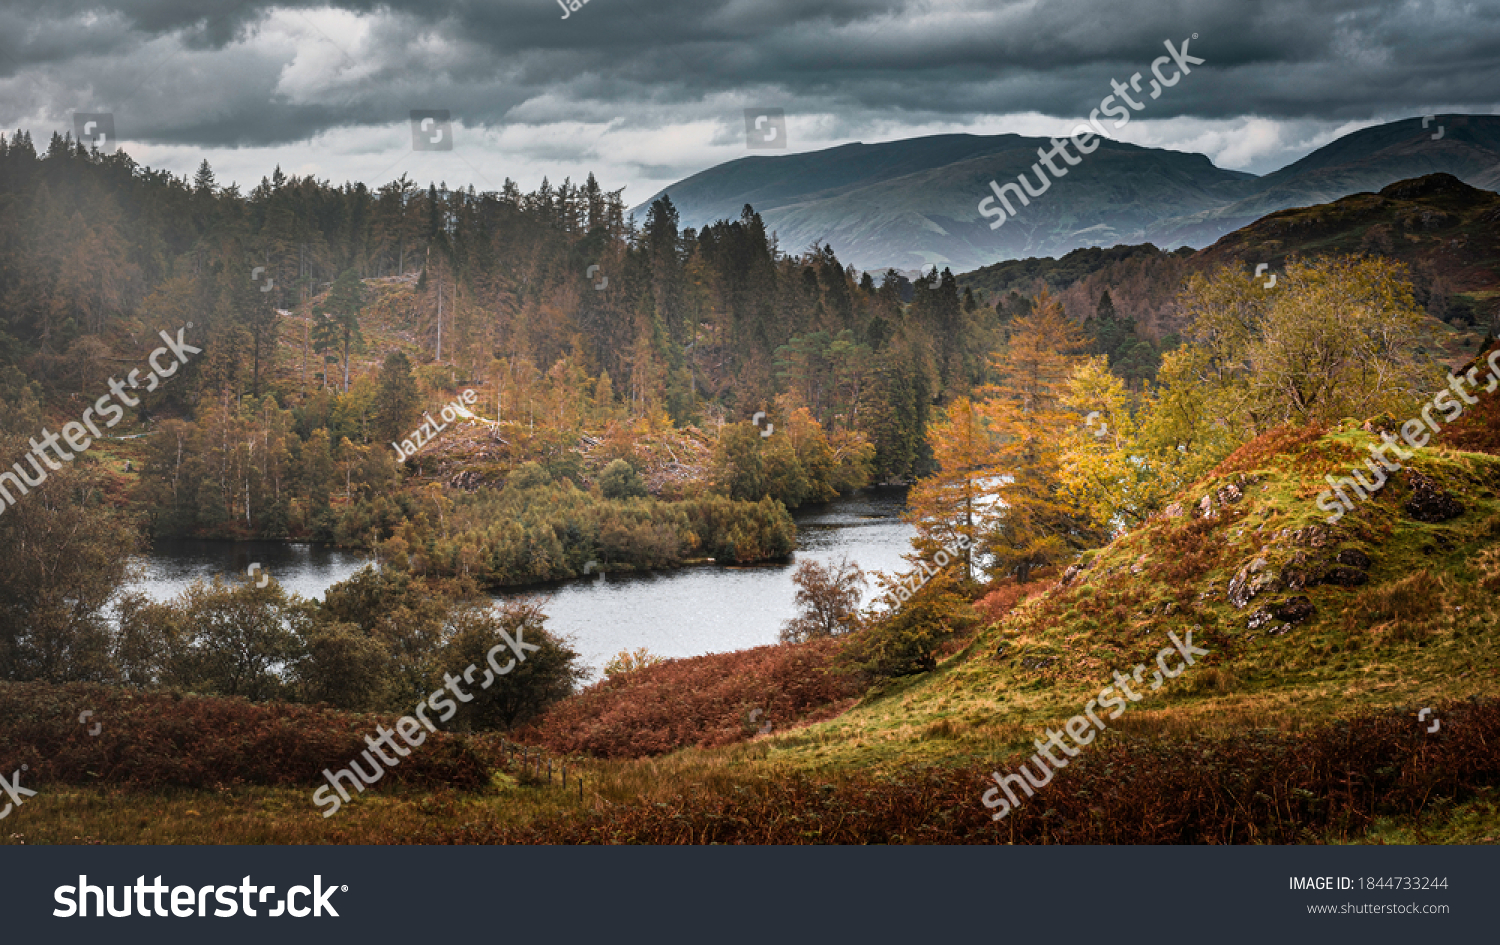 Tarn Hows in autumn.Painterly landscape scene in Lake District, Cumbria,UK.Cloudy sky over scenic mountain valley, lake and hills with trees lit by sunlight.Idyllic scenery. #1844733244